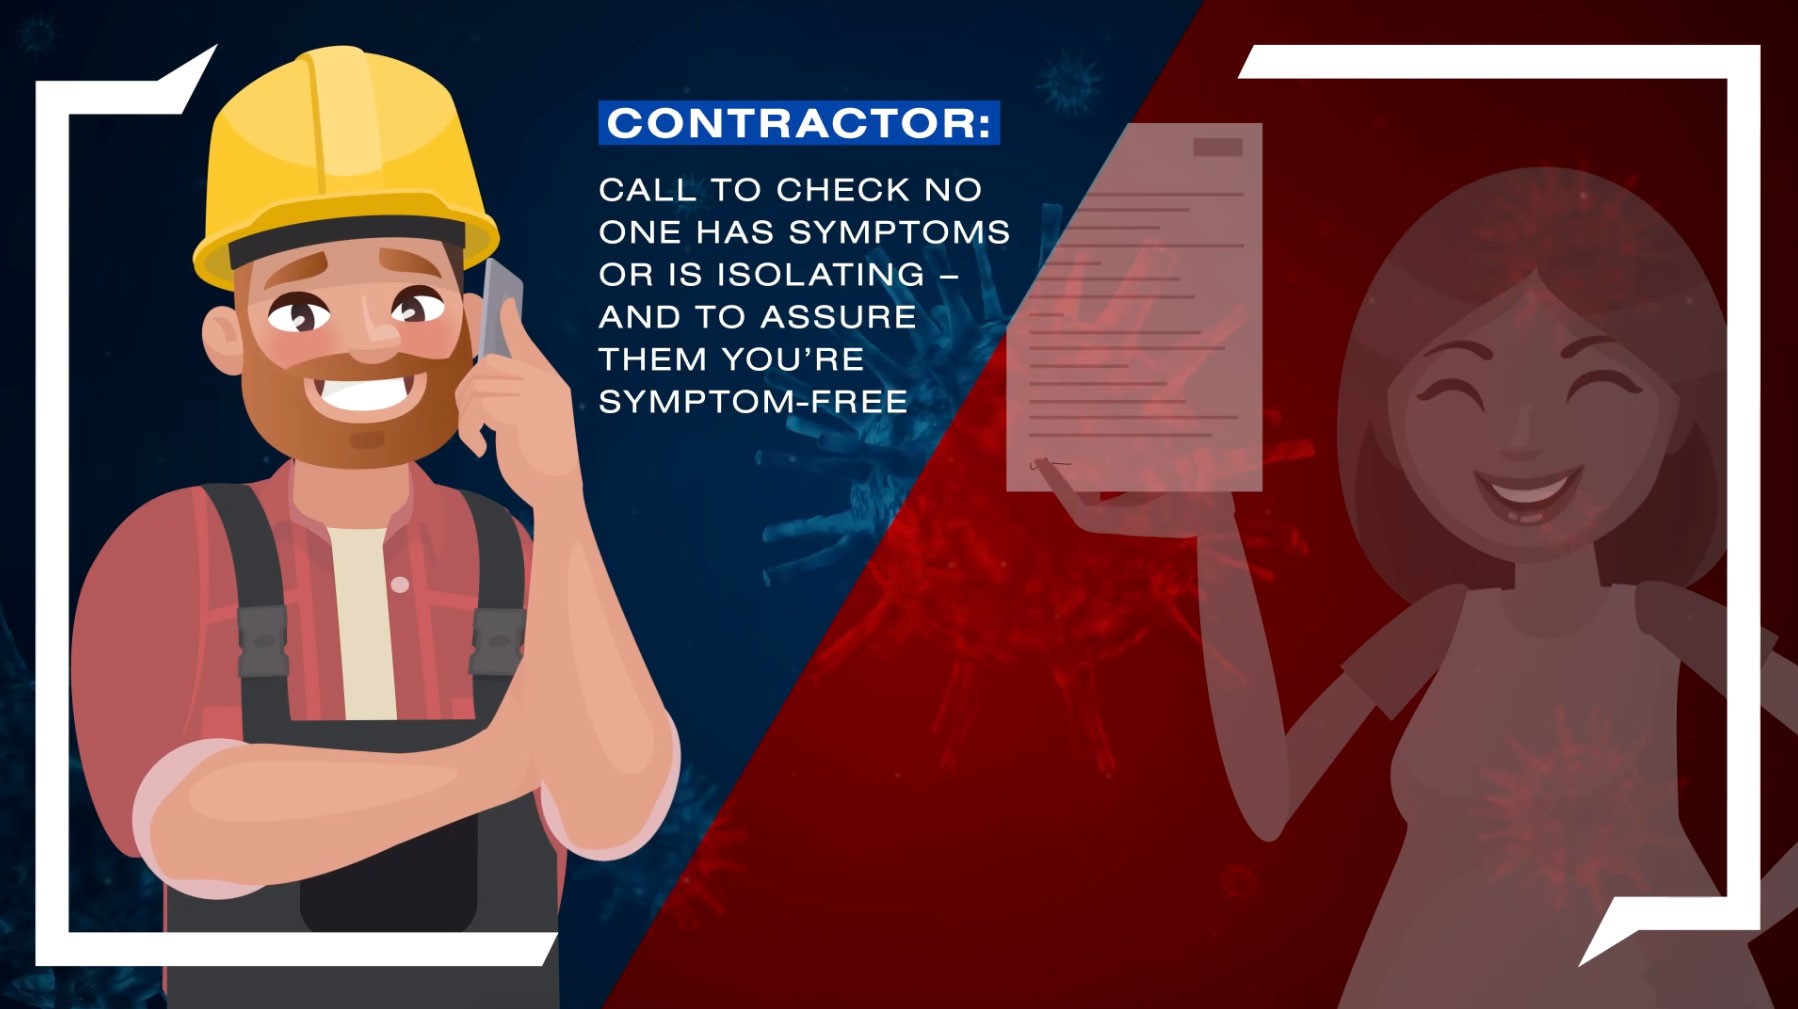 New animation offers guidance to contractors and customers during emergency domestic work